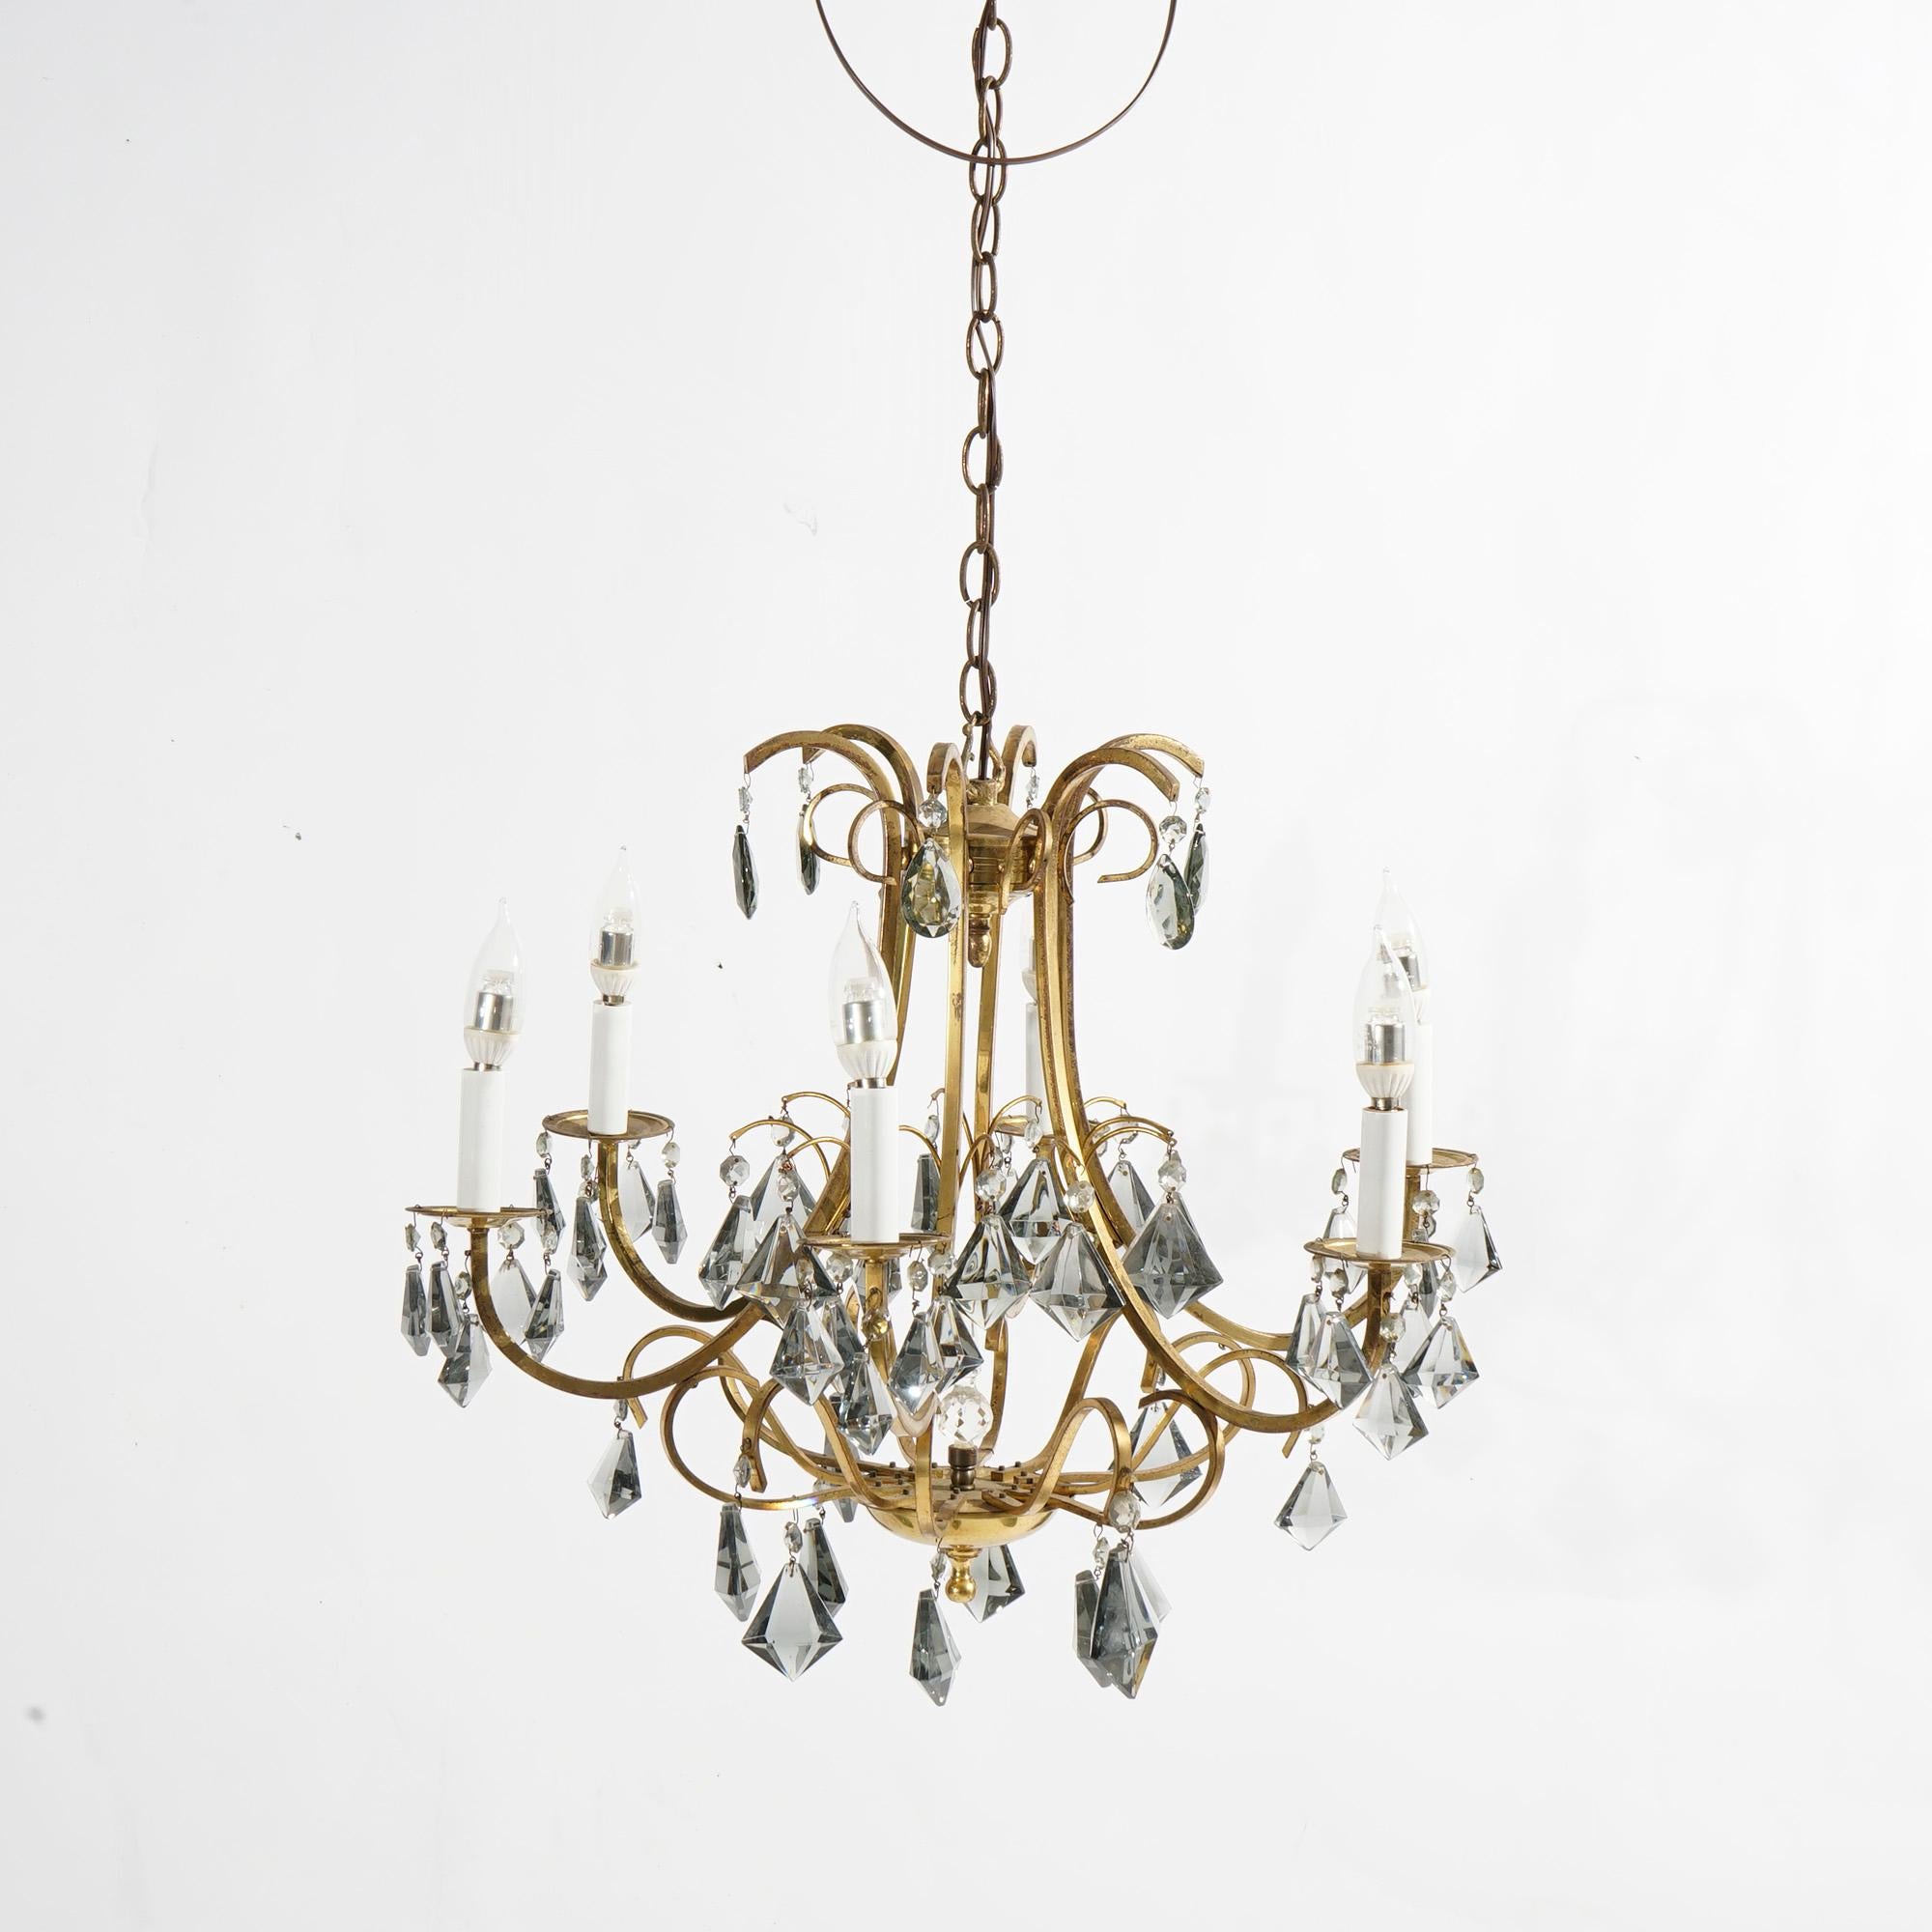 An antique French style chandelier offers gilt metal frame with six scroll form arms terminating in candle lights, hanging cut crystals throughout, c1930

Measures- 40.25''H x 23.5''W x 23.5''D.

*Ask about DISCOUNTED DELIVERY rates within 1,500